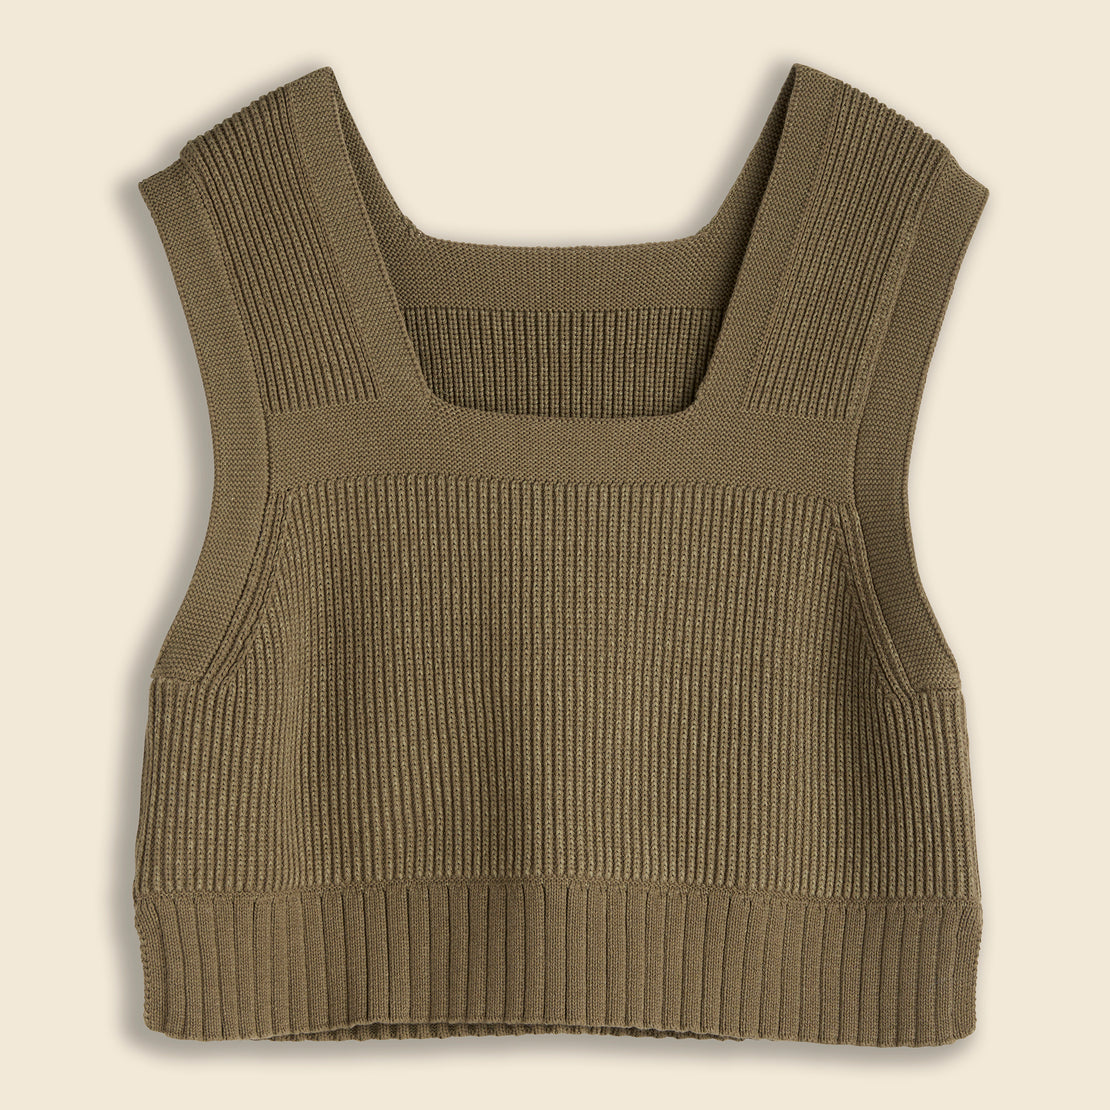 SOLO Mil Sweater Vest - Olive - BEAMS BOY - STAG Provisions - W - Tops - Sleeveless